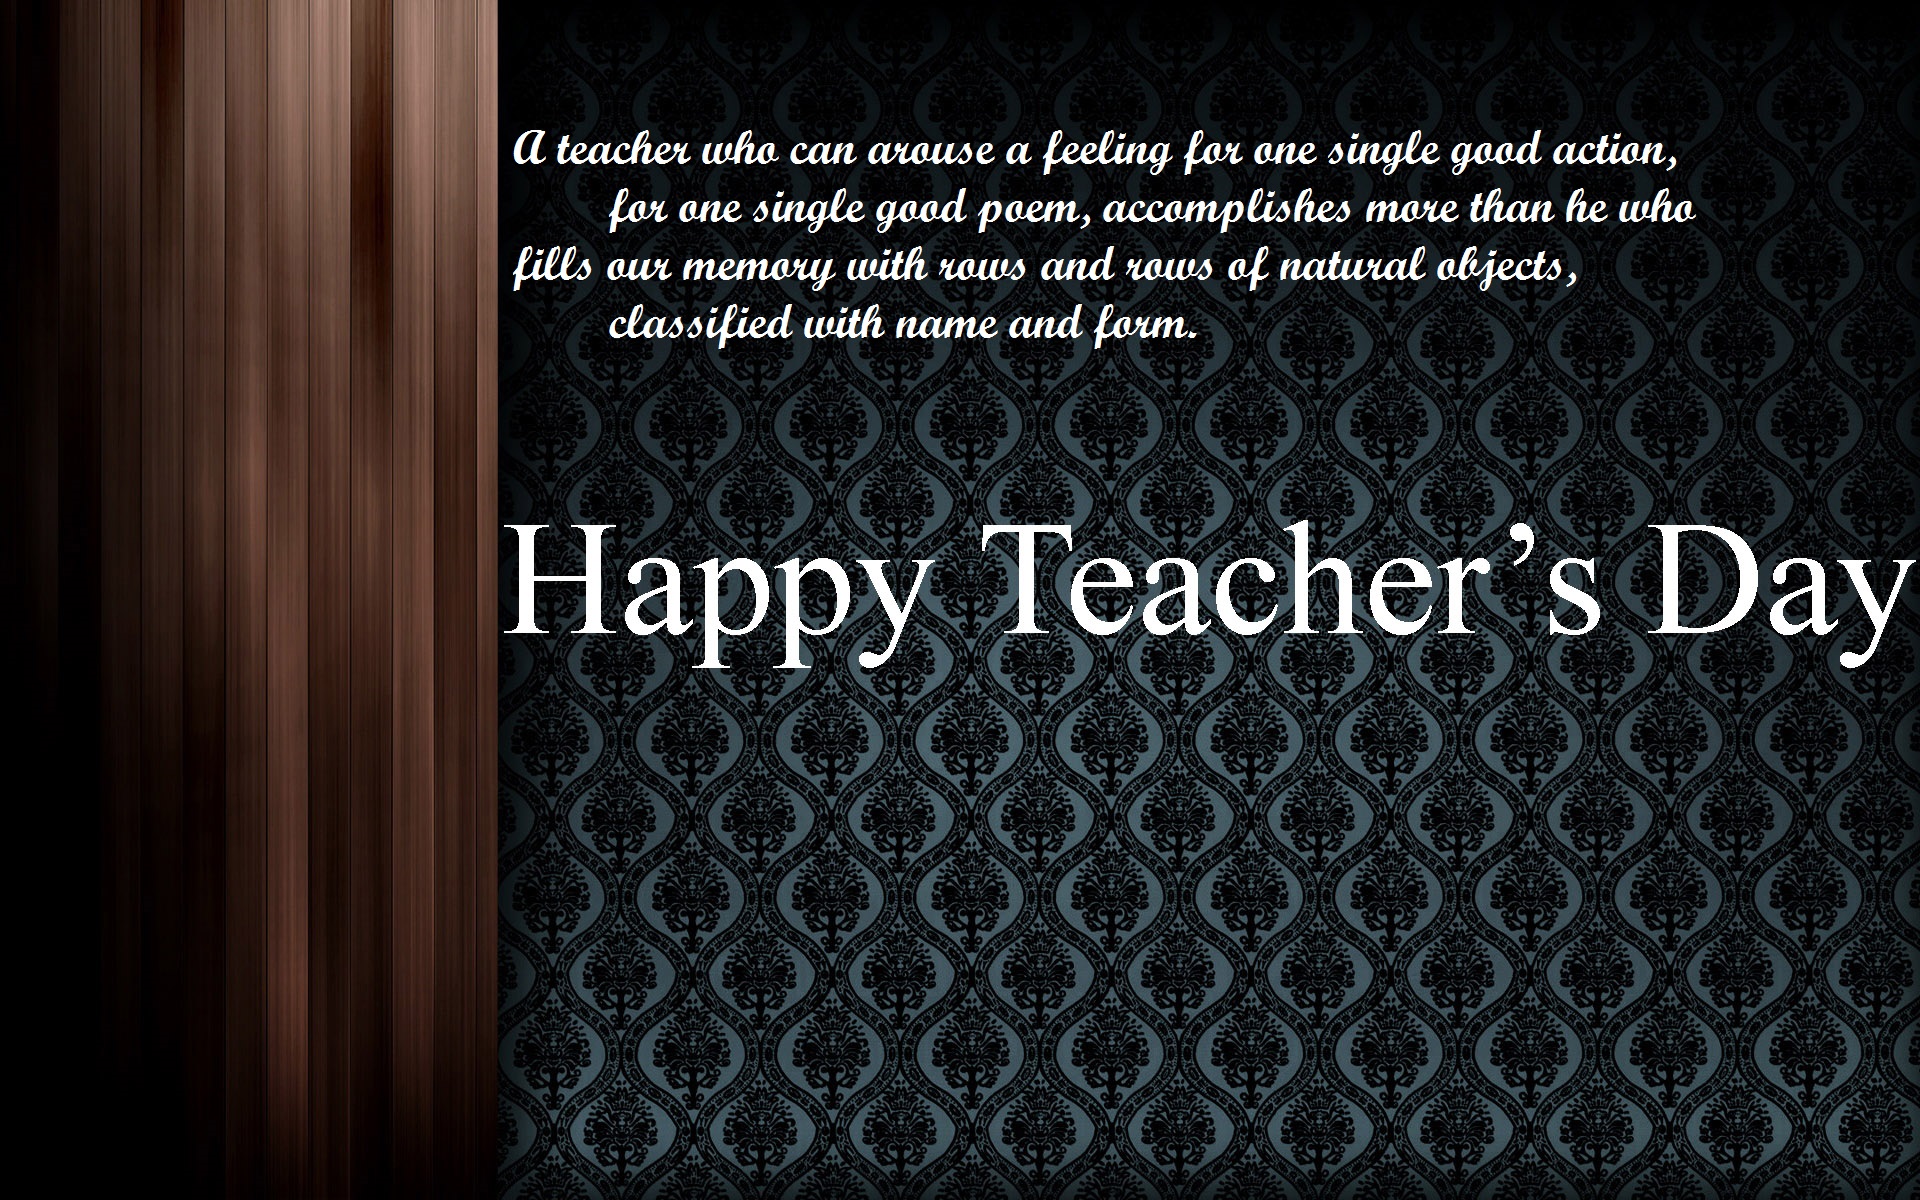 Teachers Day Hd Images & Wallpapers Free Download - Happy Teachers Day Hd , HD Wallpaper & Backgrounds